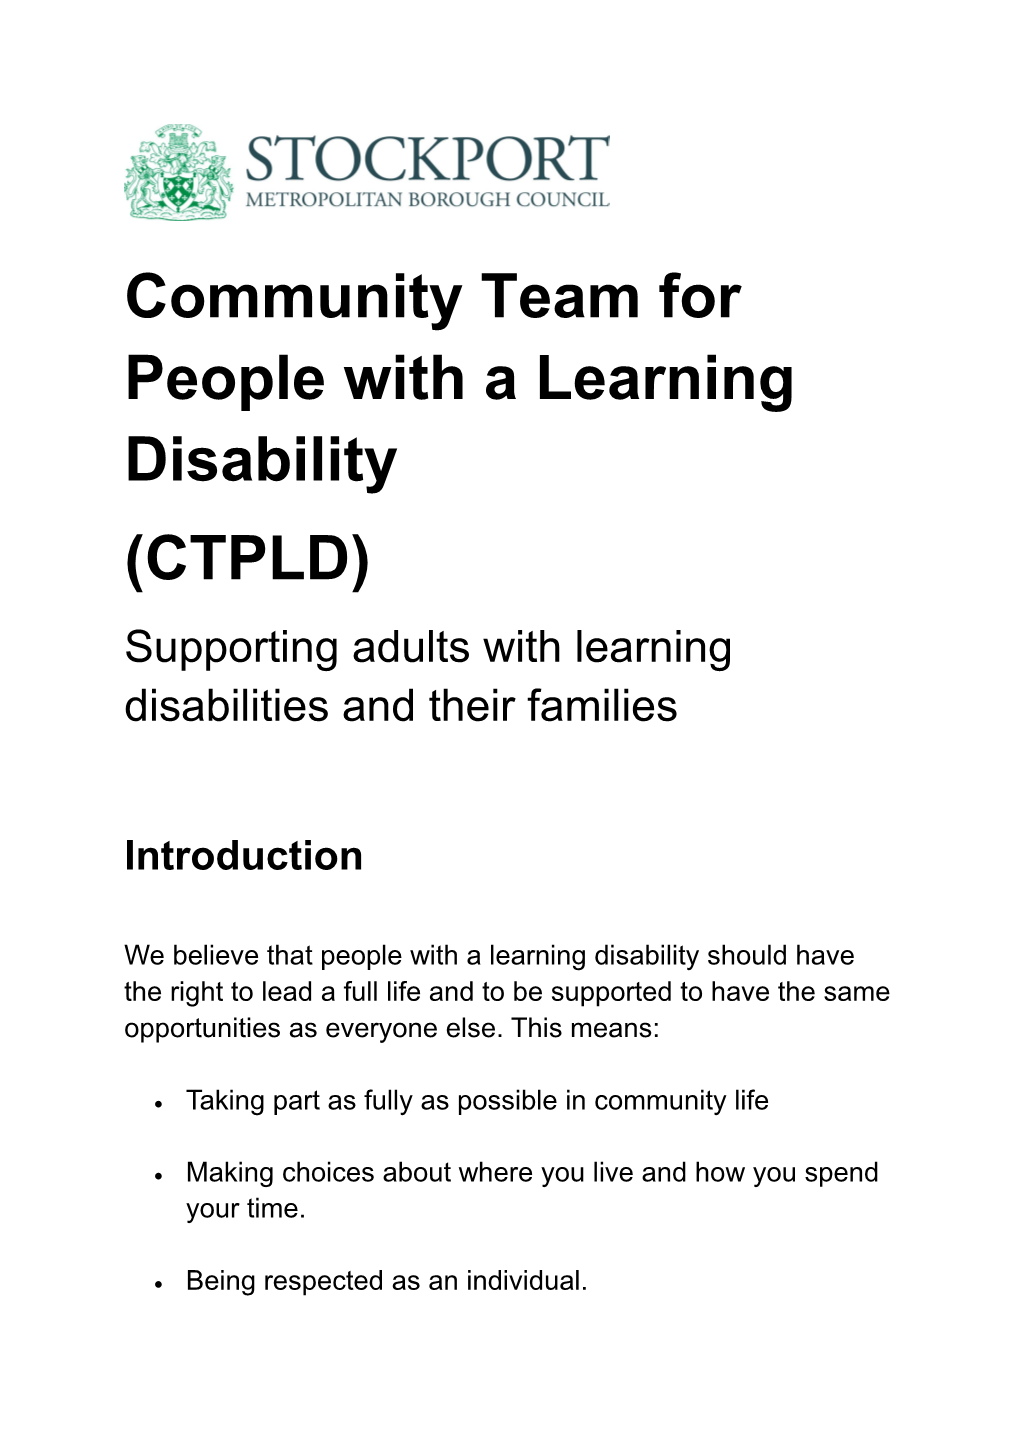 Community Team for People with a Learning Disability